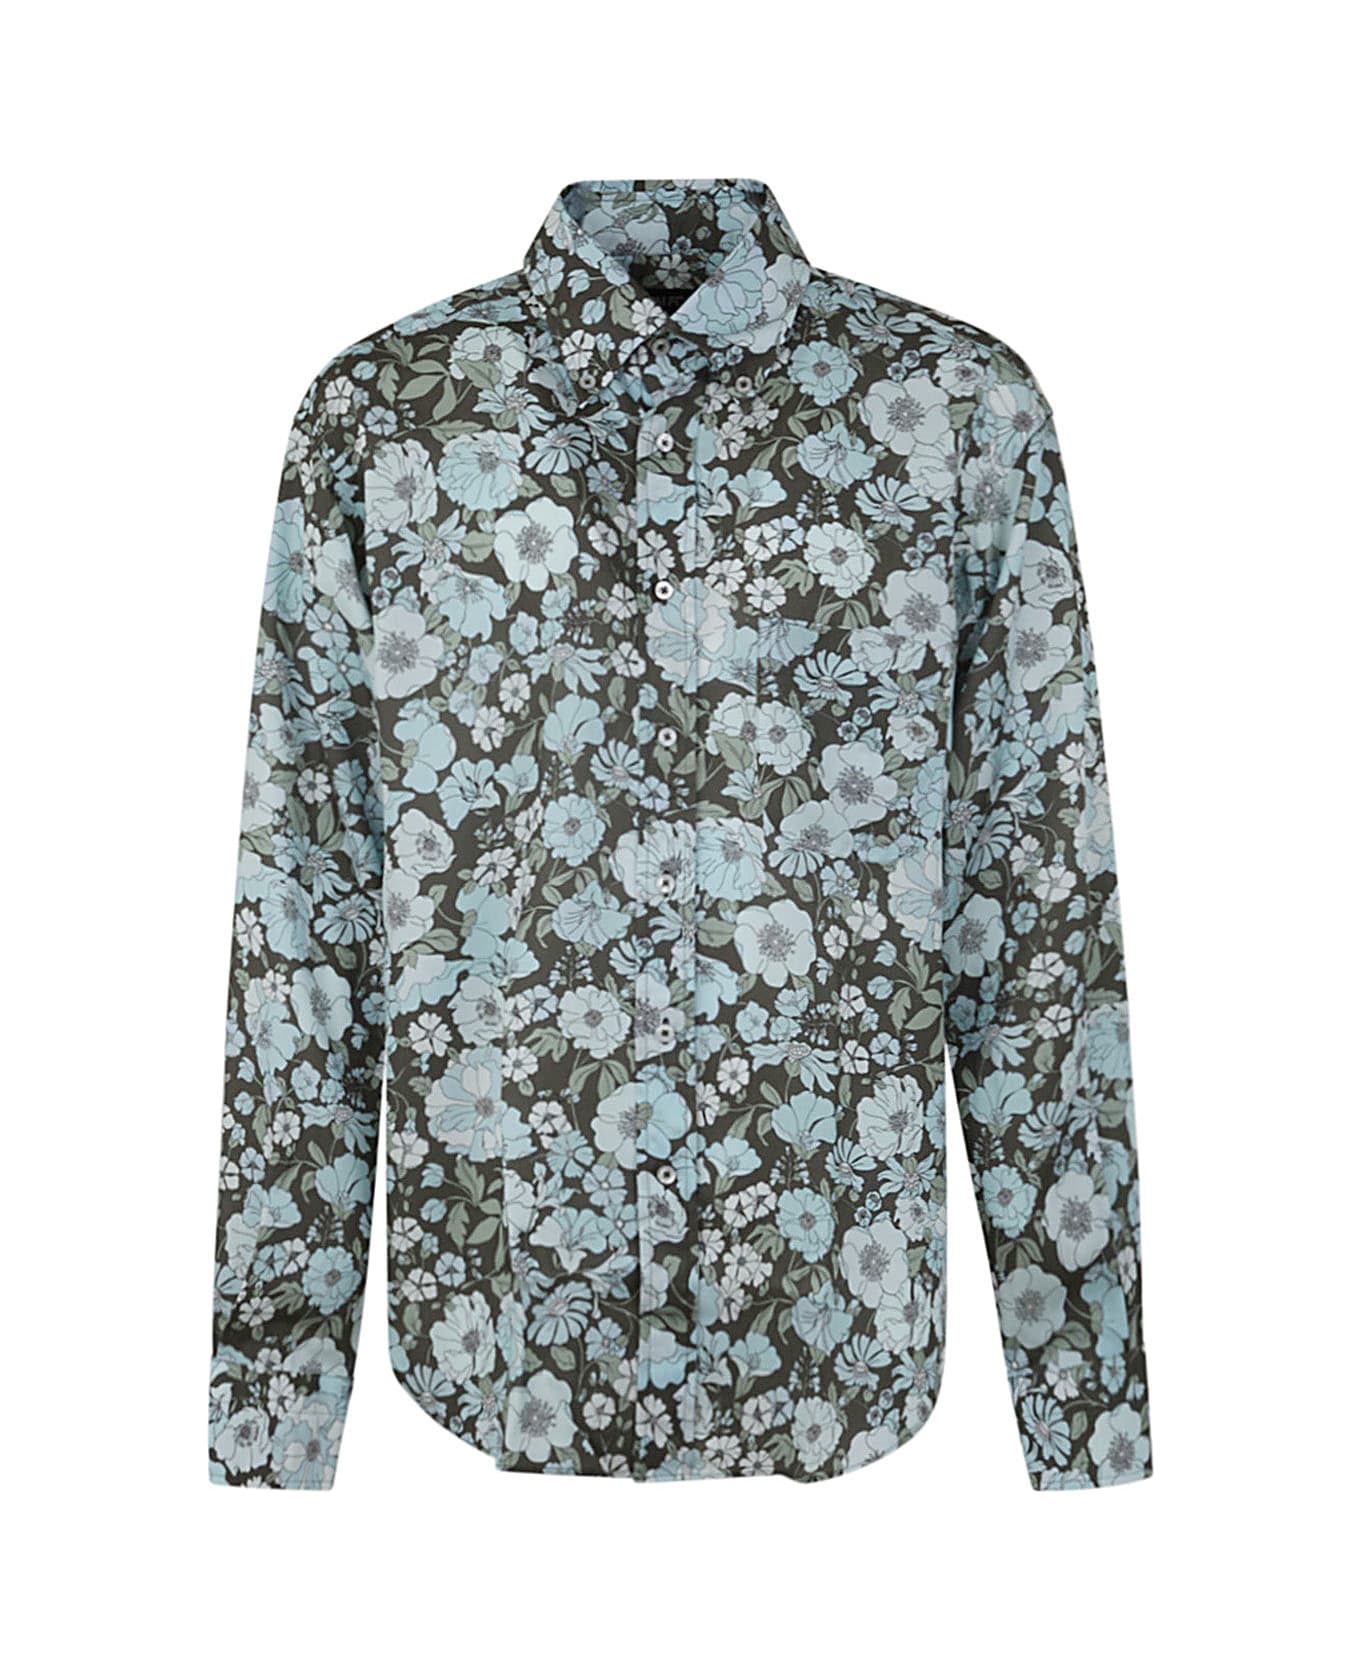 Tom Ford Fluid Shirt - Zfghb Combo Military Sage Light Blue